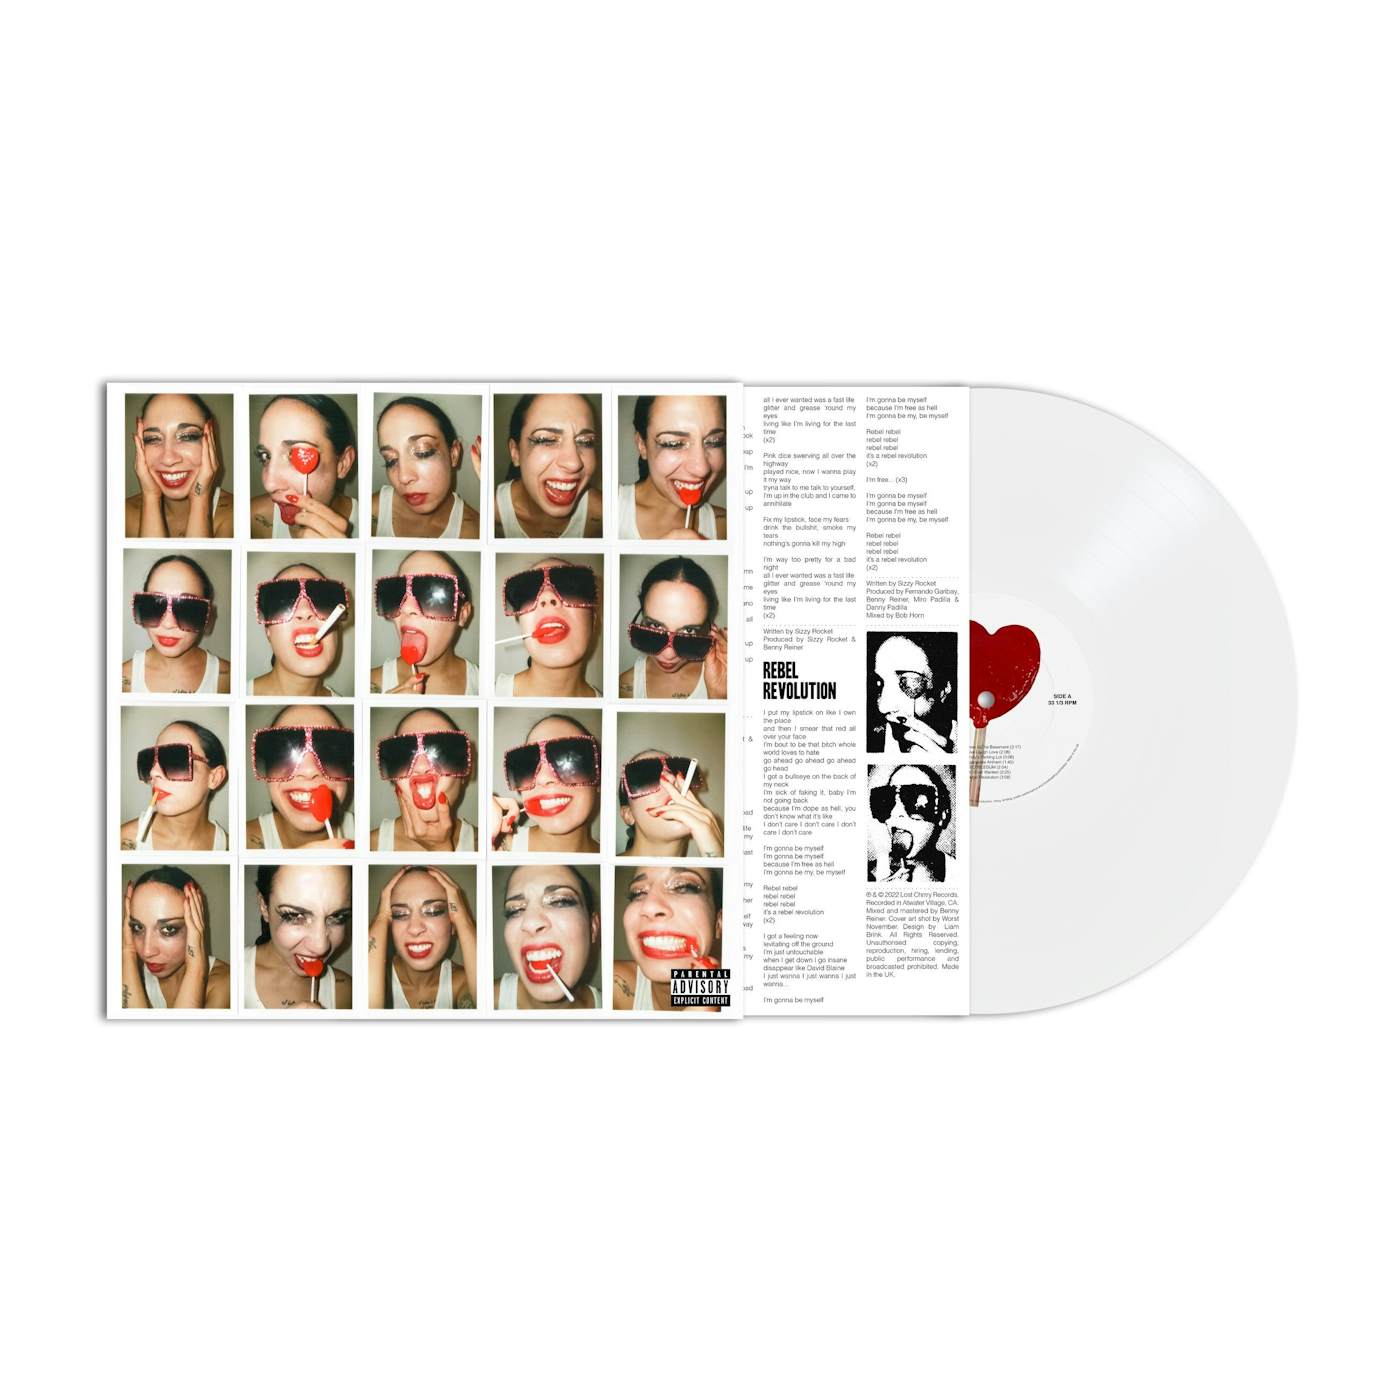 Sizzy Rocket Live Laugh Love - Limited Edition White Vinyl (Pre-Order)